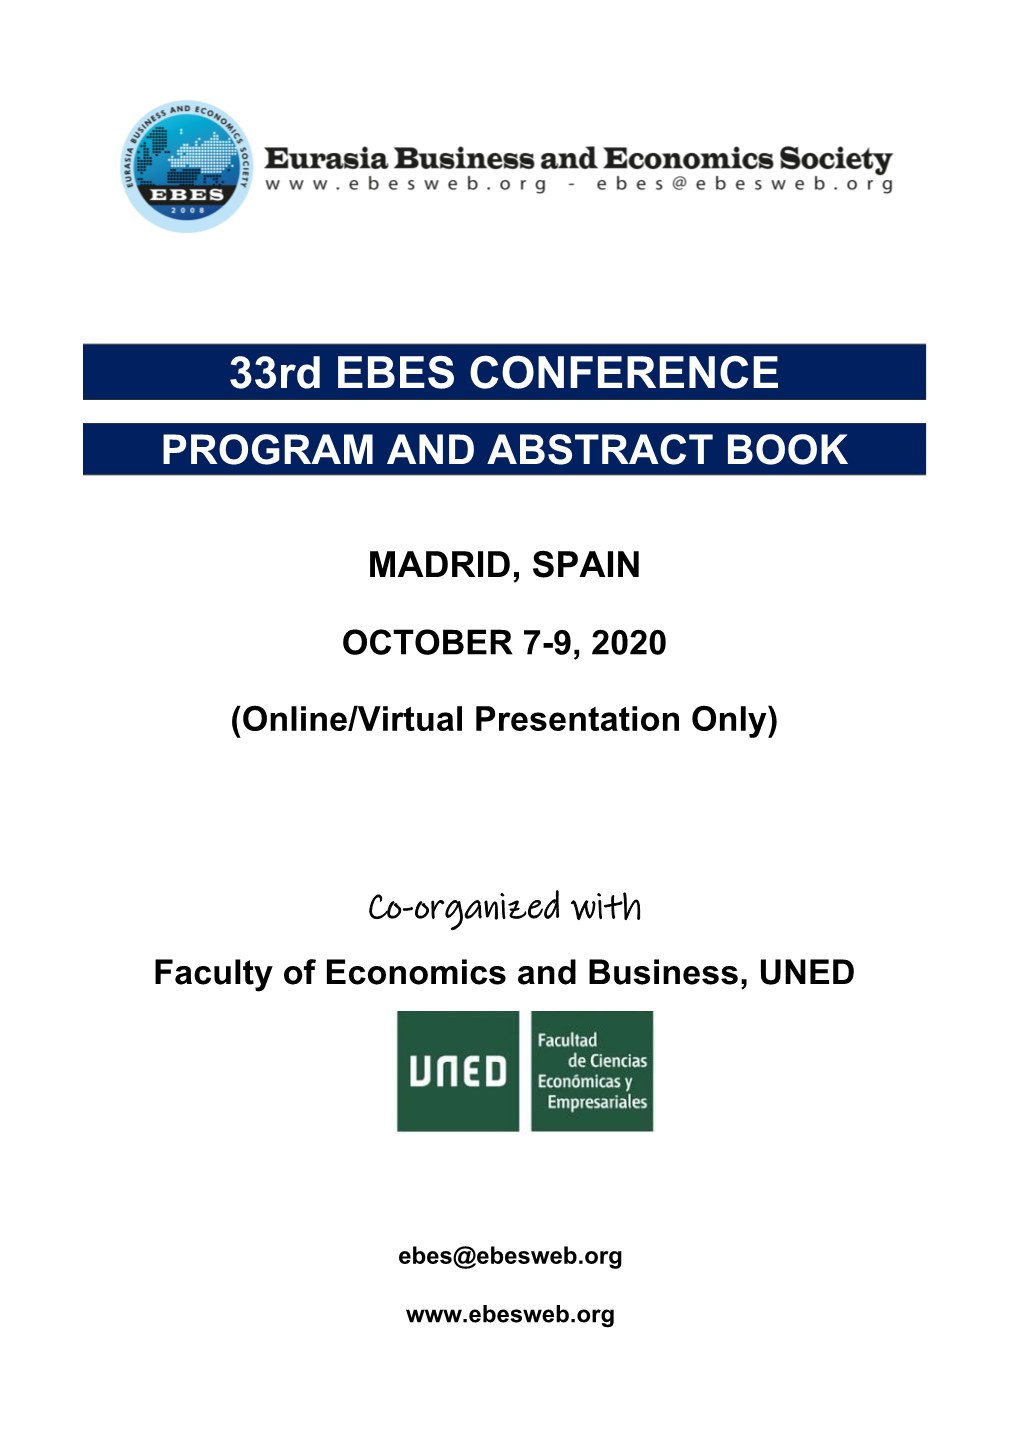 33Rd EBES CONFERENCE PROGRAM and ABSTRACT BOOK